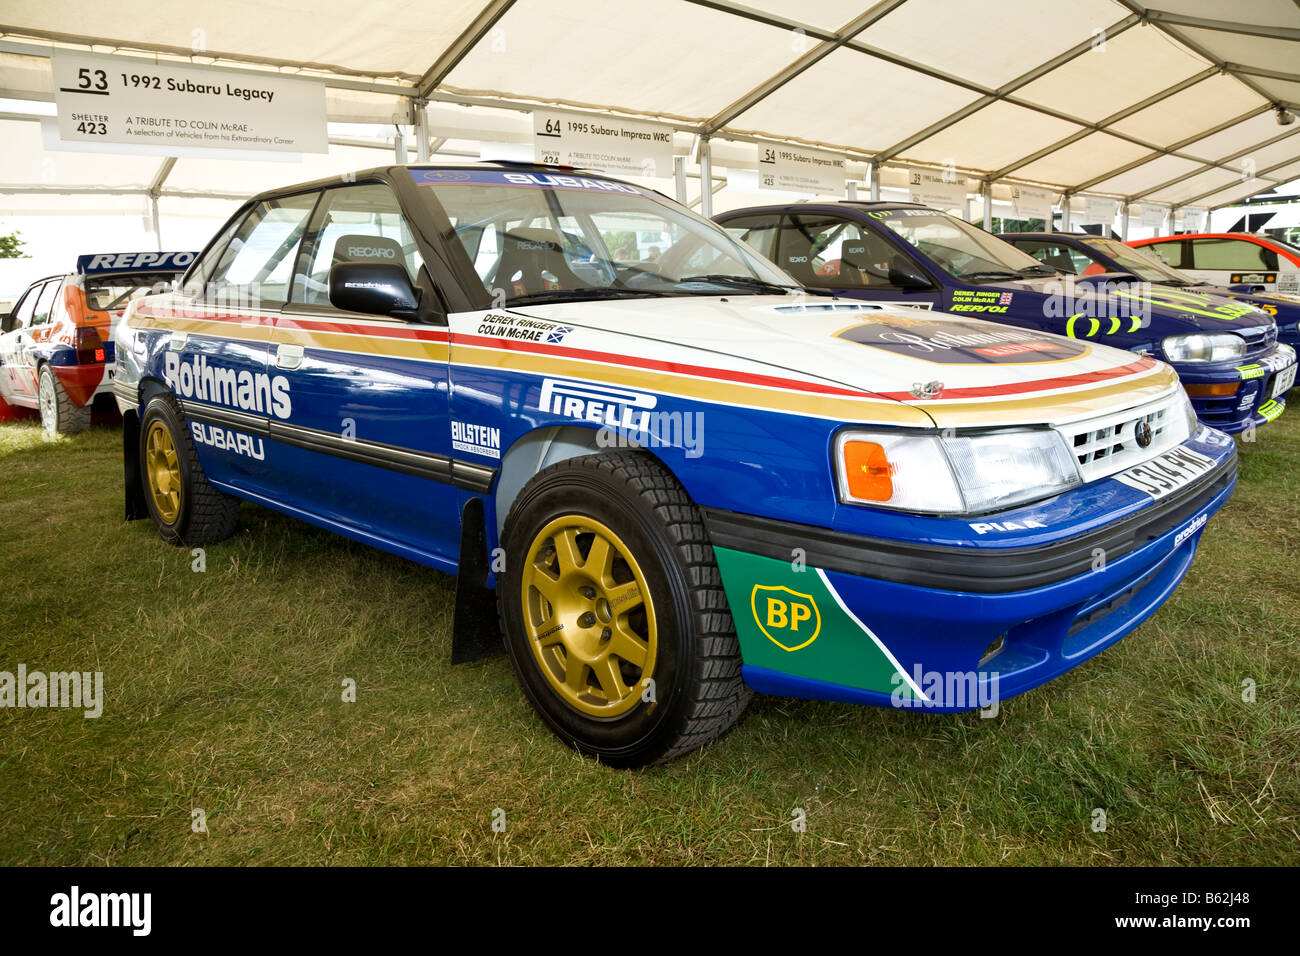 1992 Subaru Legacy Rally, Colin McRae's championship car in the paddock at Goodwood Festival of Speed, Sussex, UK. Stock Photo